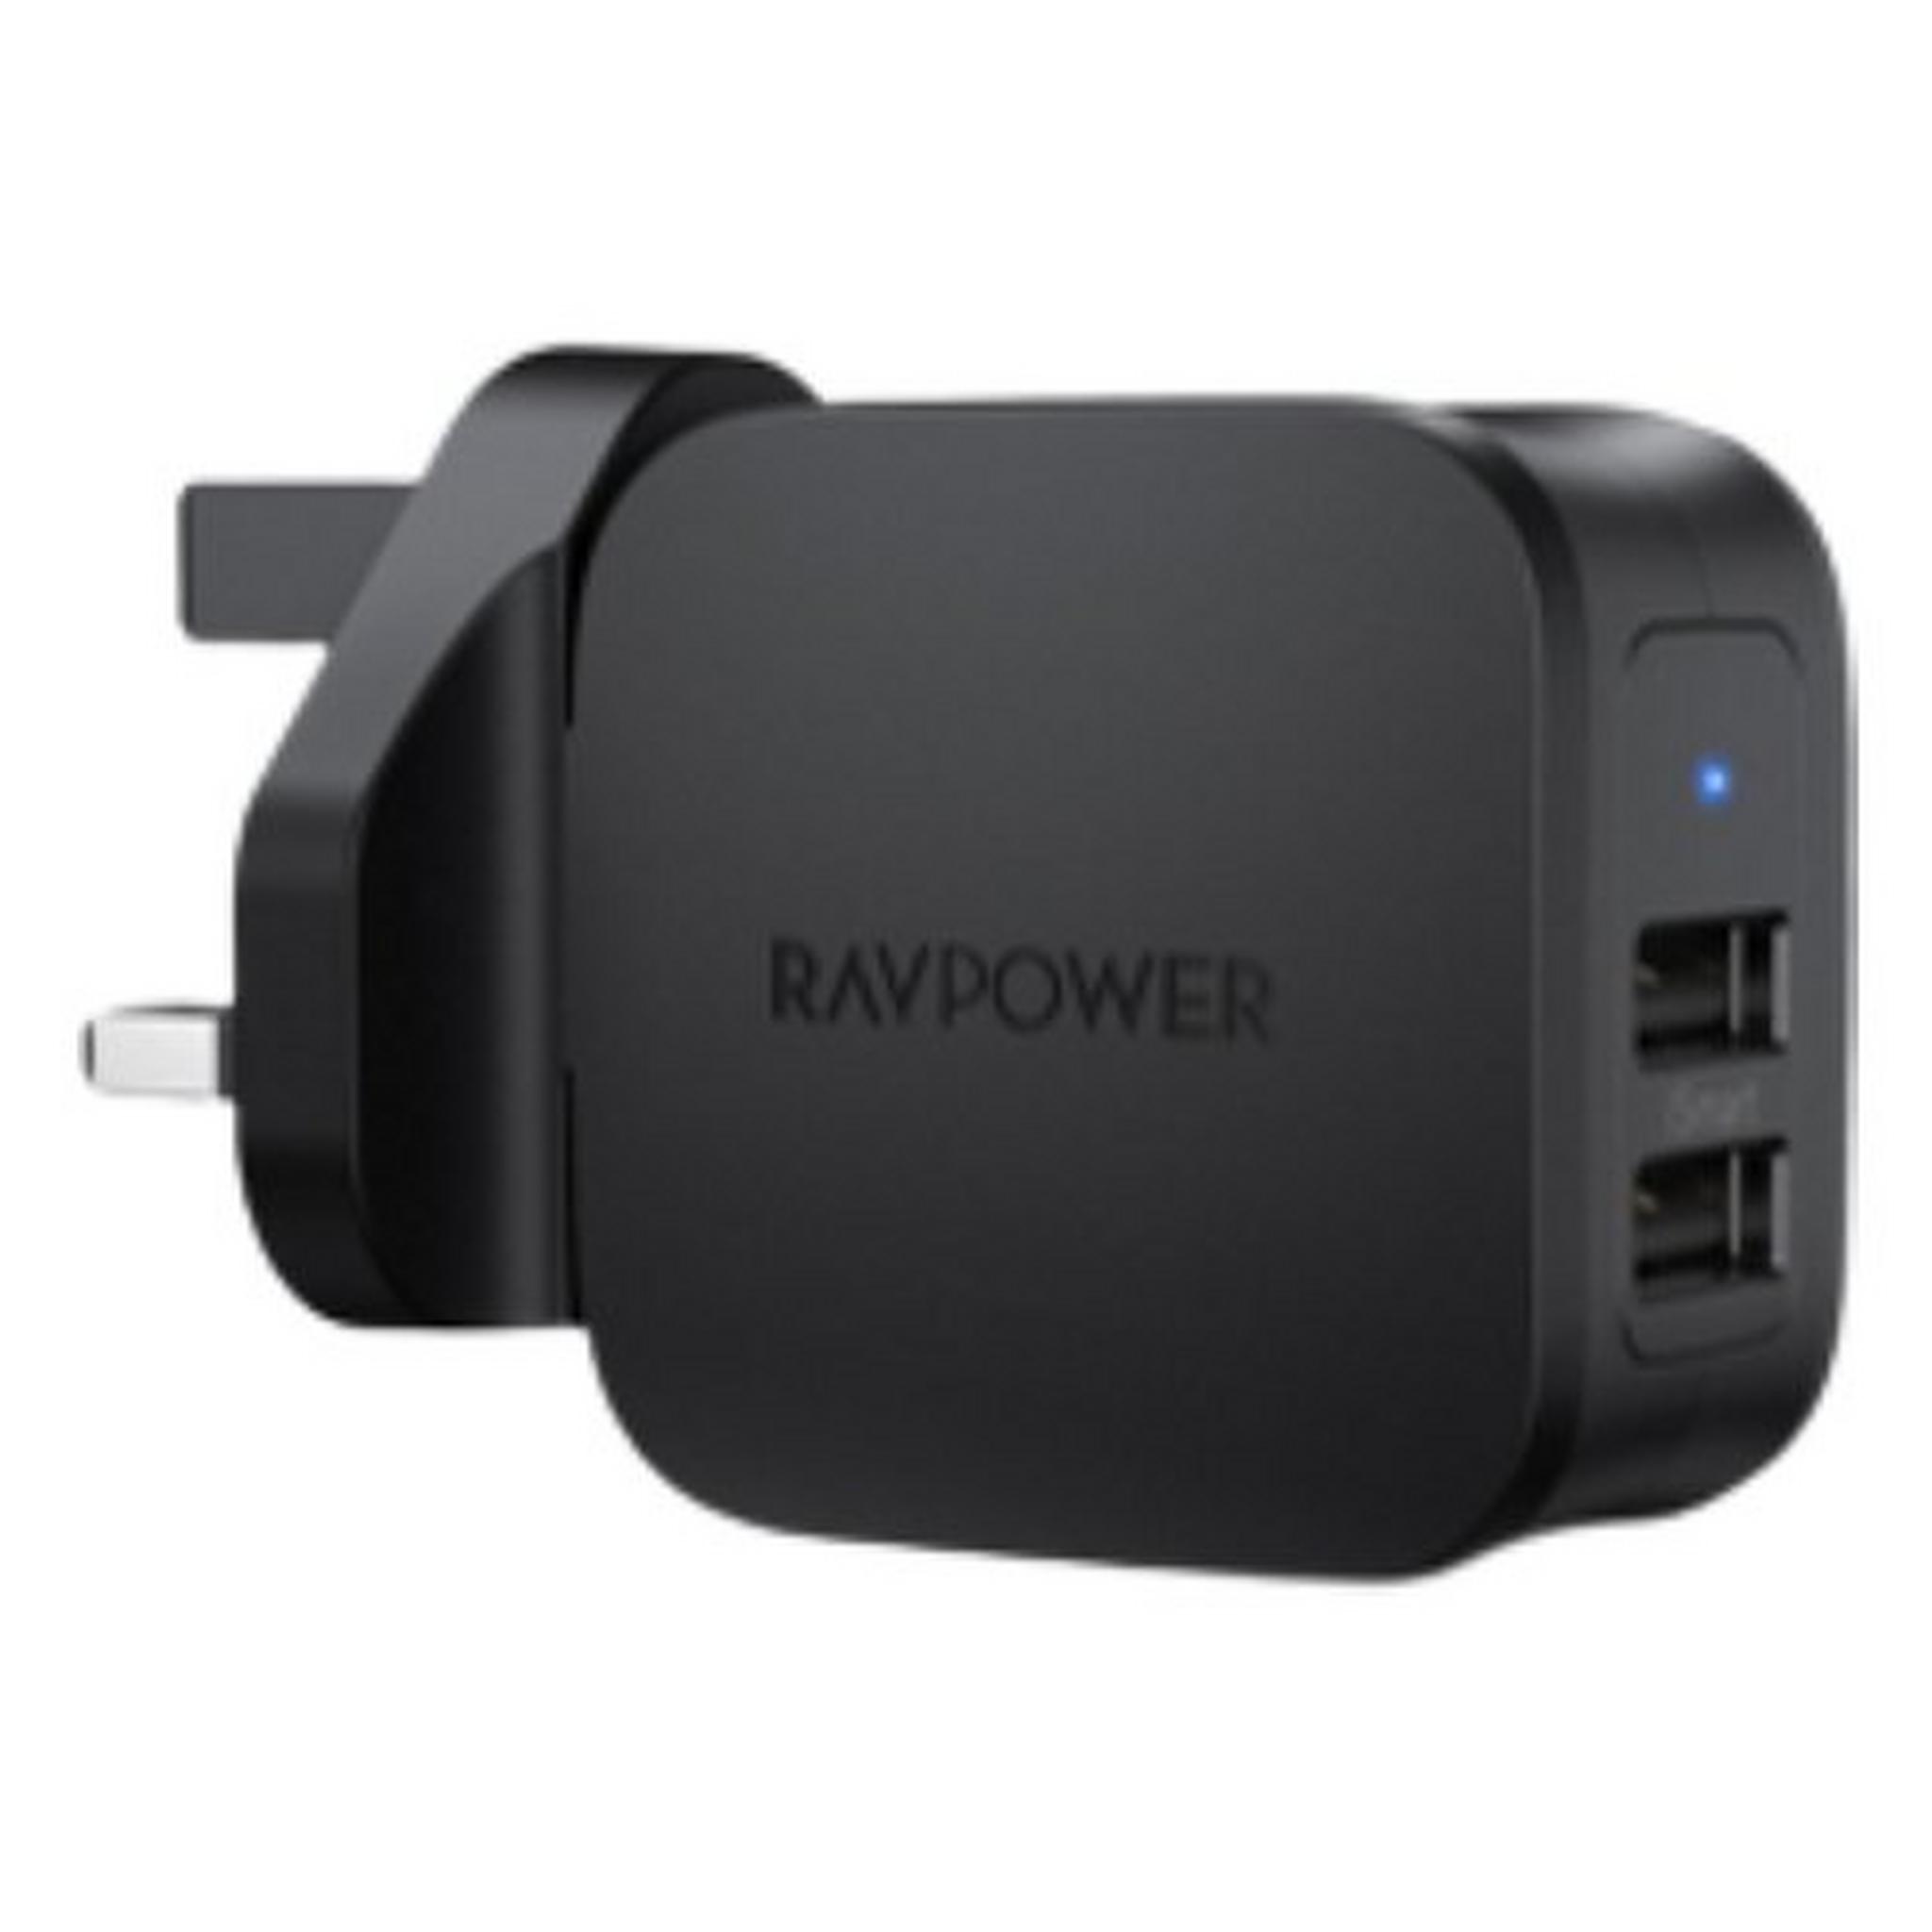 RAVPower 10000mAh Power Bank + Type-C to Lighting Cable + Wall Charger